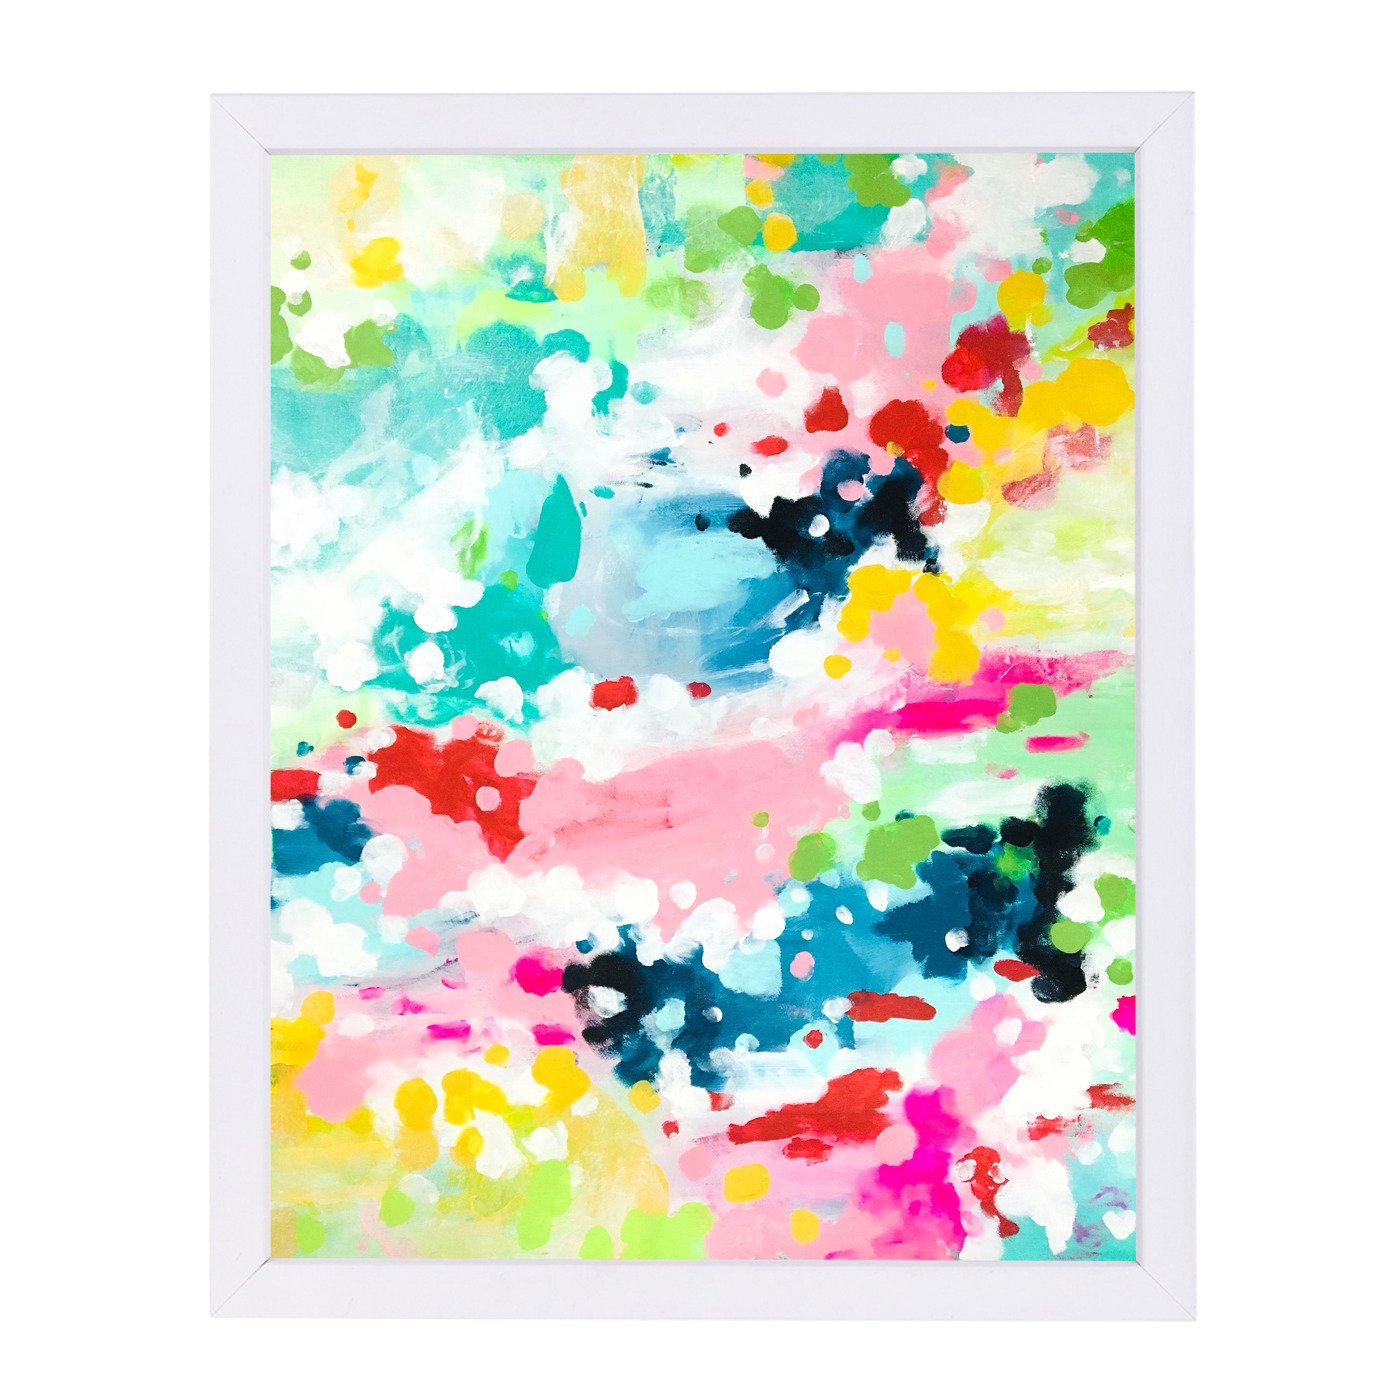 Pastel Fantasy Abstract Clouds By Ejaaz Haniff - Framed Print - Americanflat